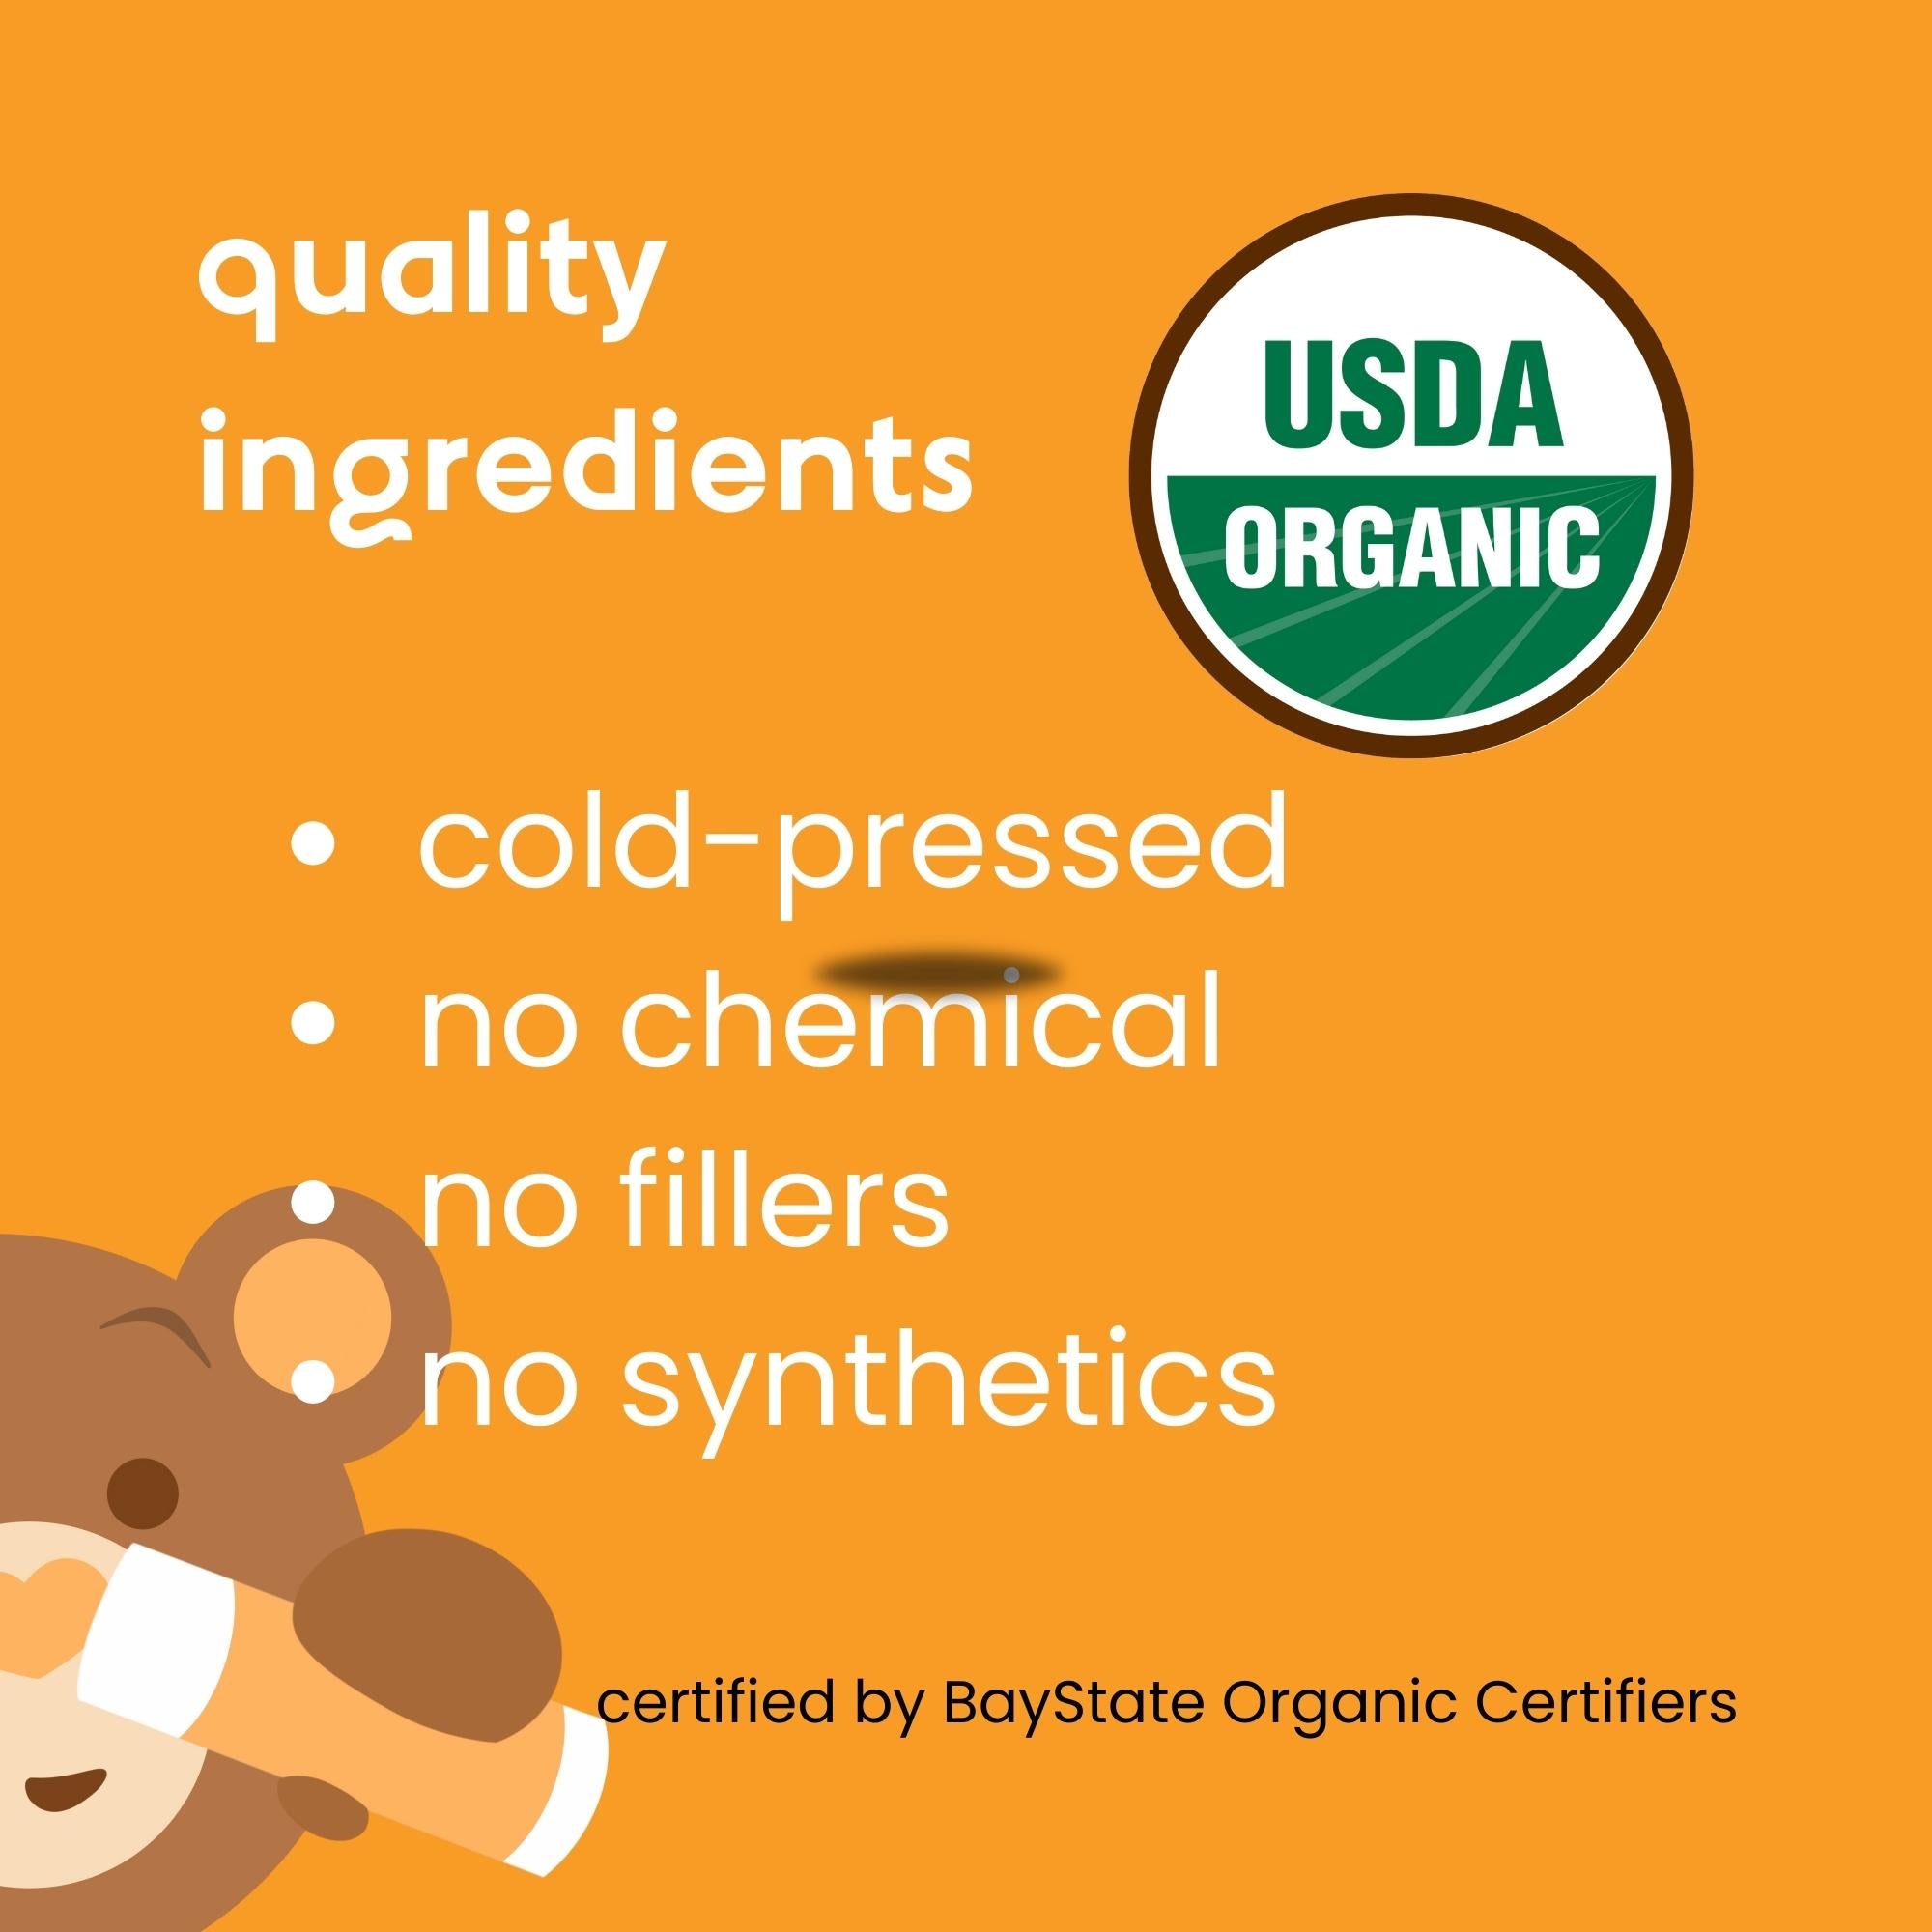 our products are USDA certified organic